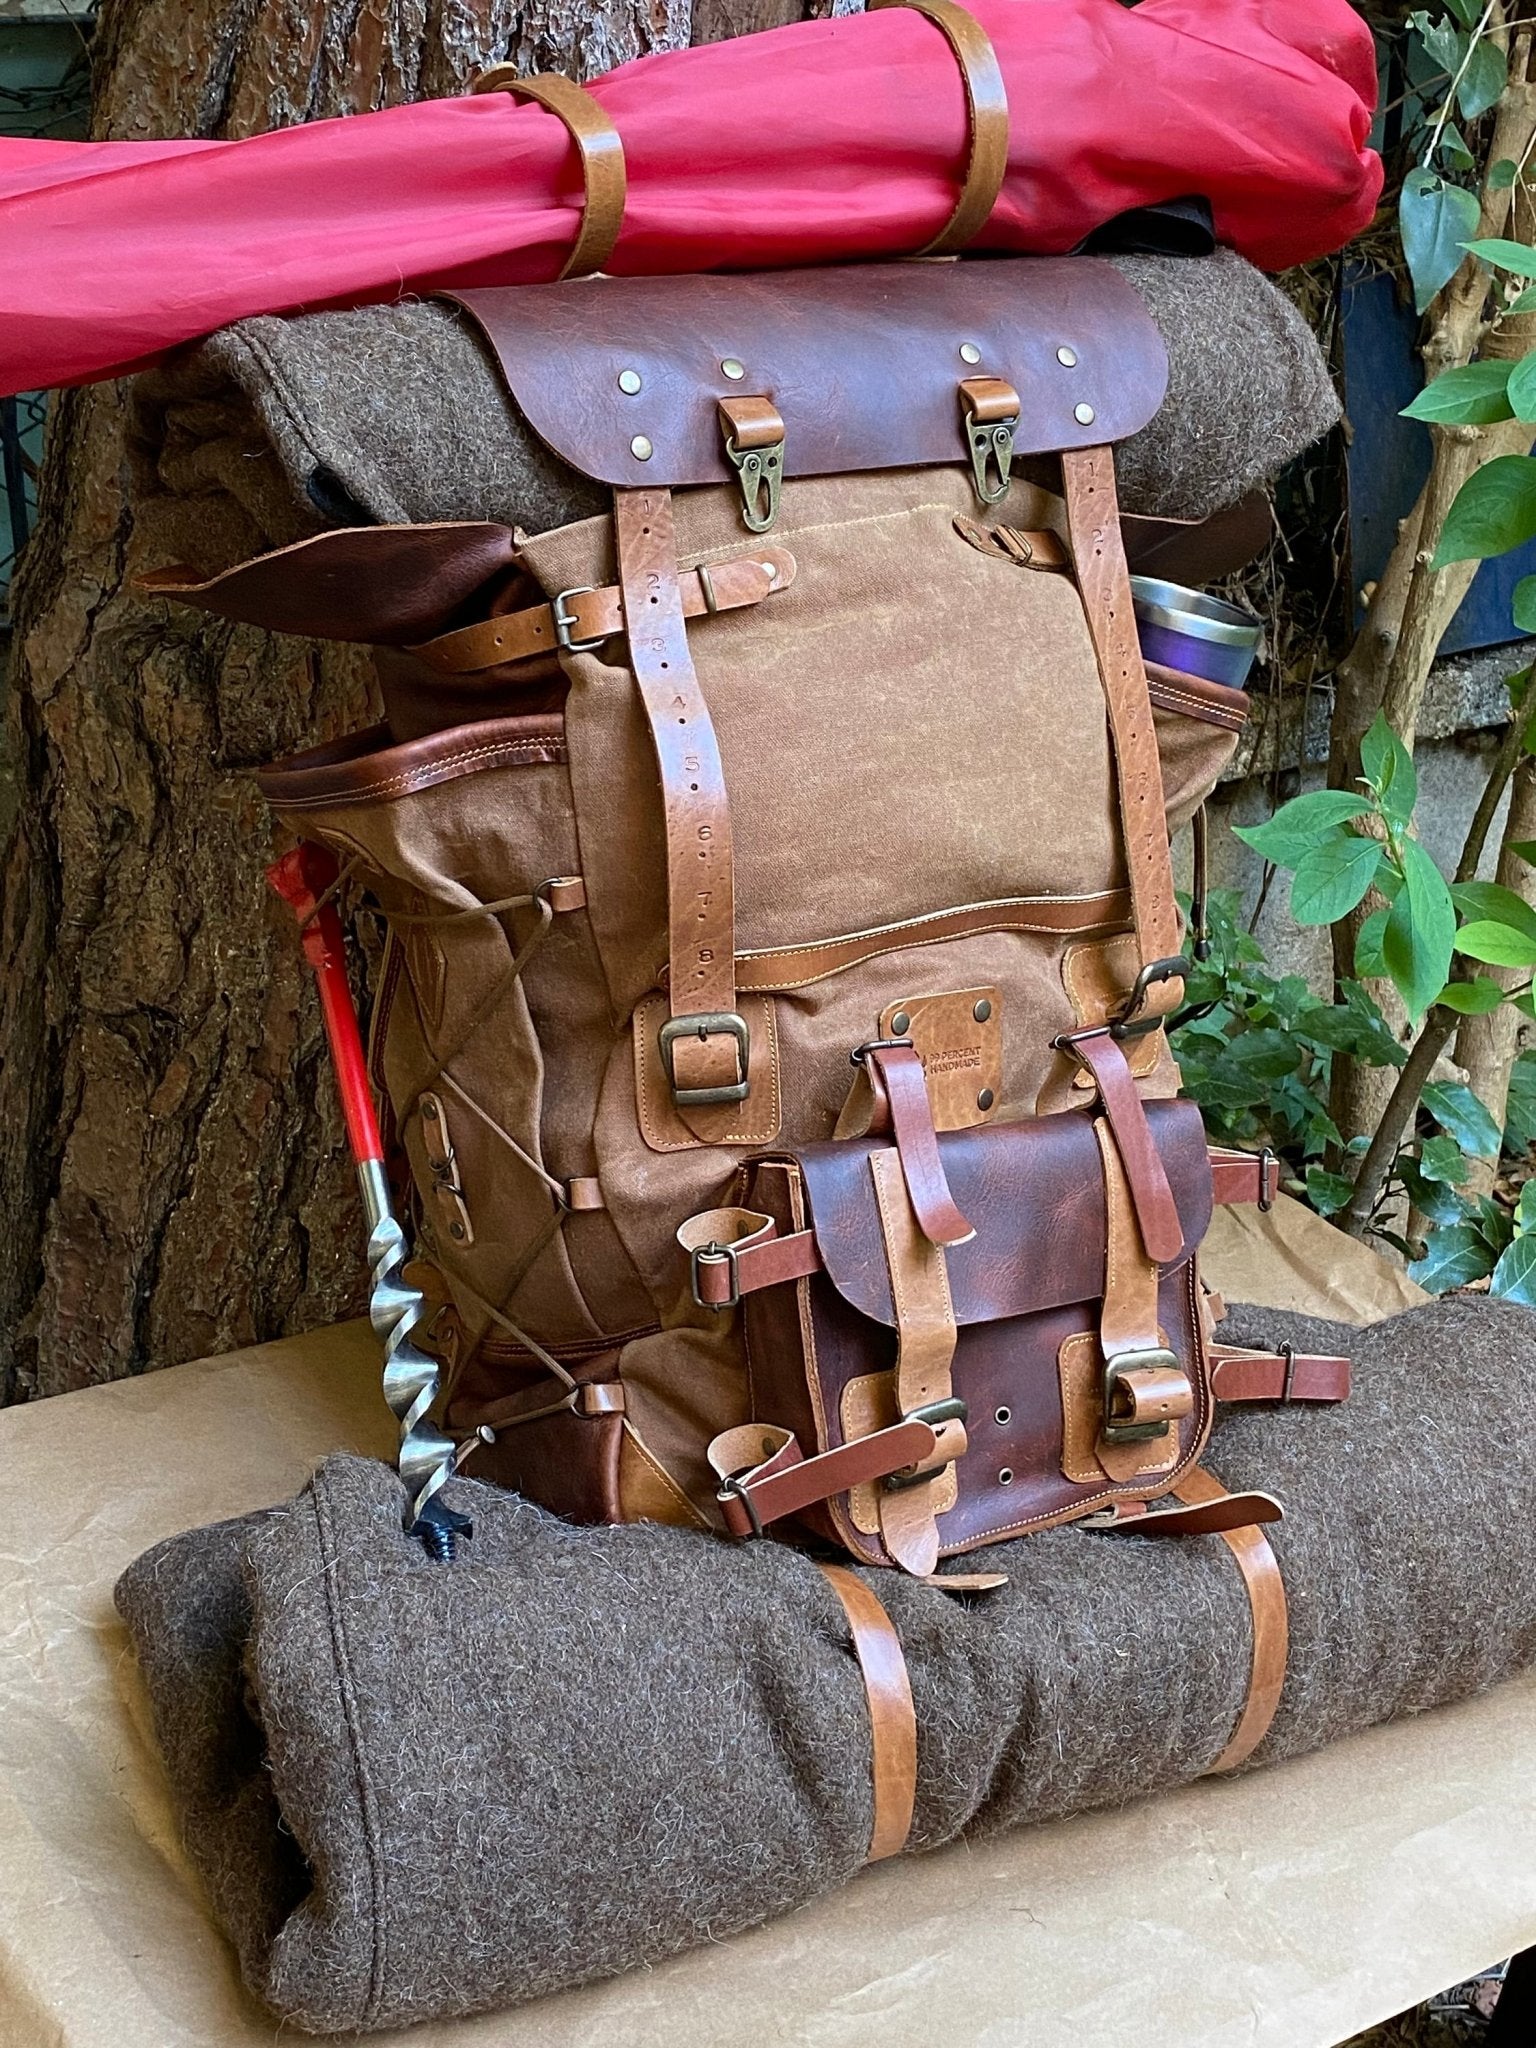 300 USD Discount | Vintage Bushcraft Design | 45 L | Handmade Leather, Waxed Backpack for Travel, Camping, Hunting, Hiking | Personalization bushcraft - camping - hiking backpack 99percenthandmade   